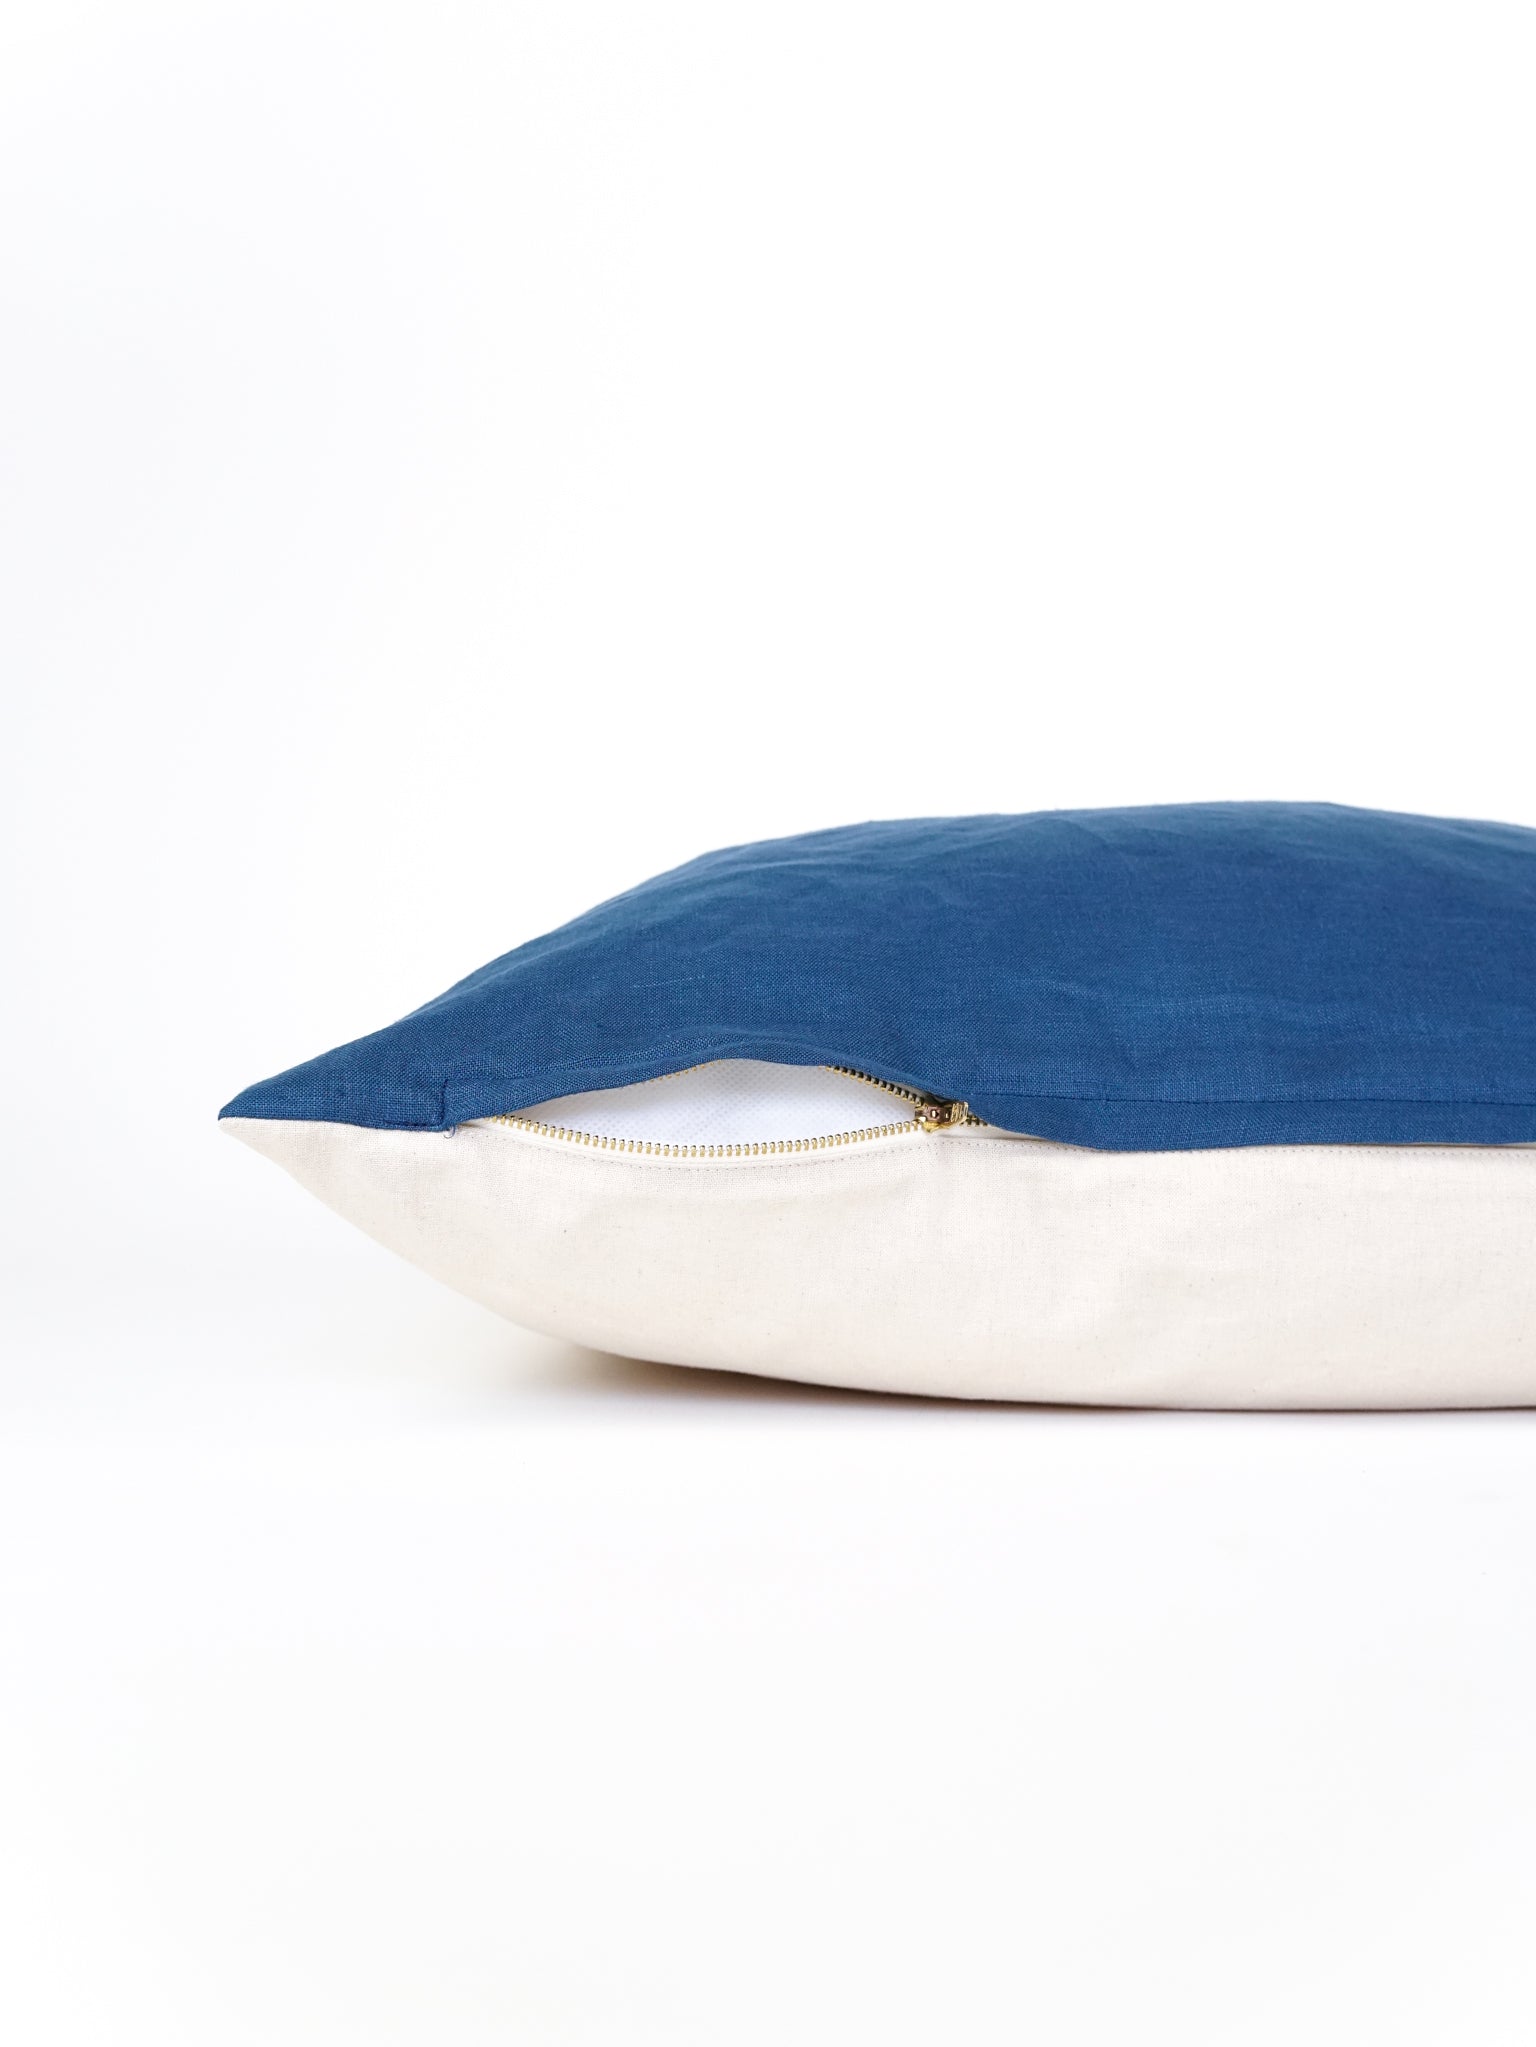 The Everyday Dog Bed in Ocean Blue Zipper